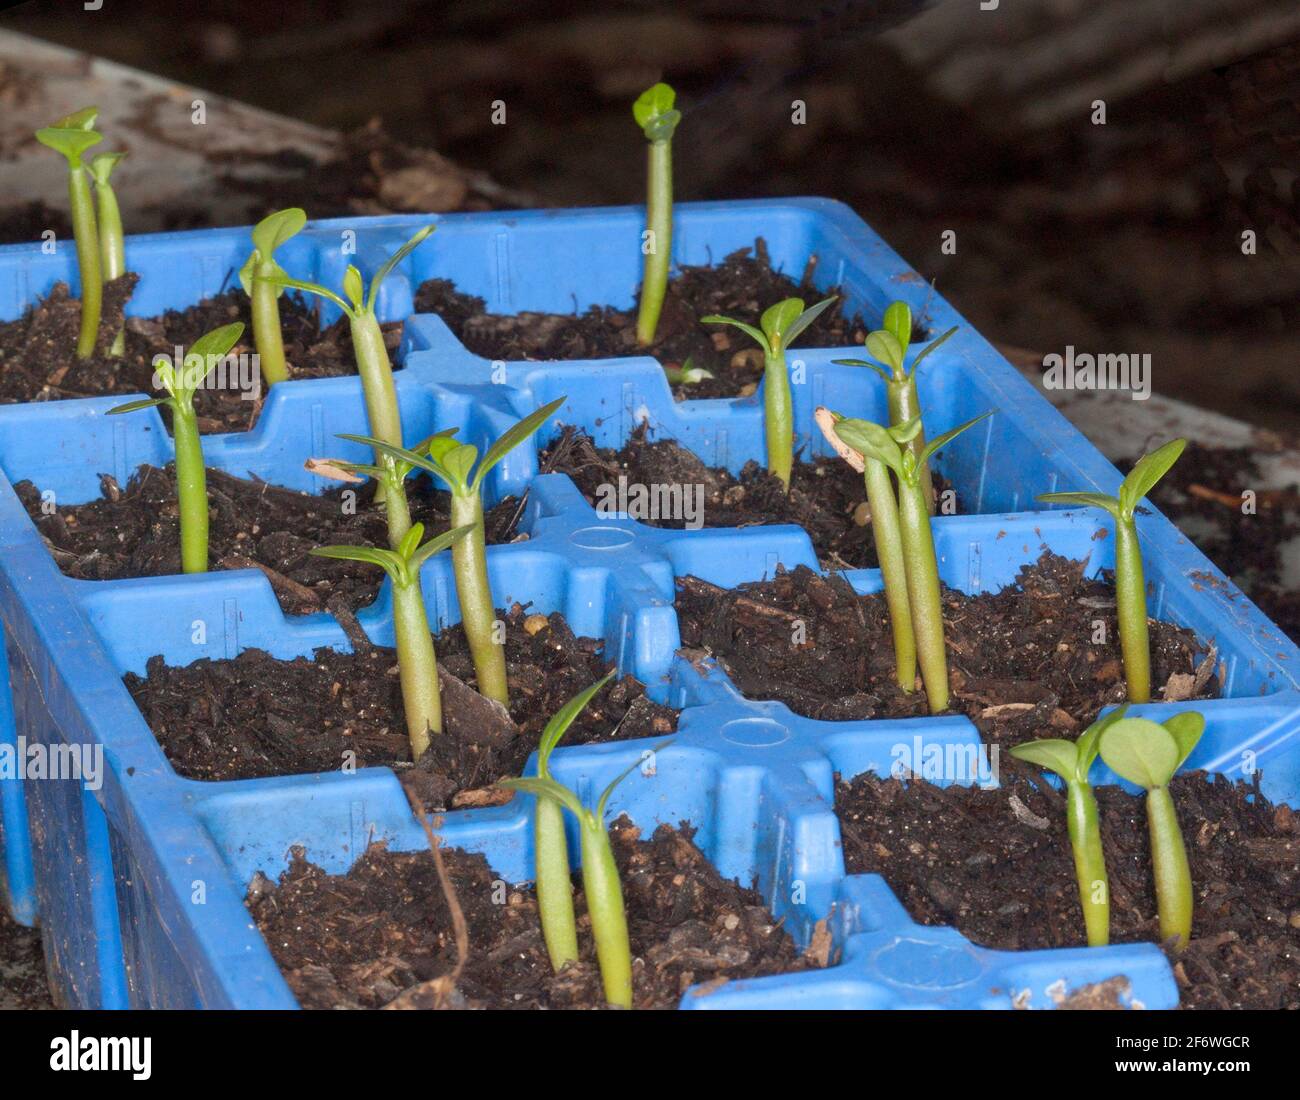 Group of seedlings of Adenium obesum, African Desert Rose, sprouting from the soil in blue plastic seed raising containers Stock Photo